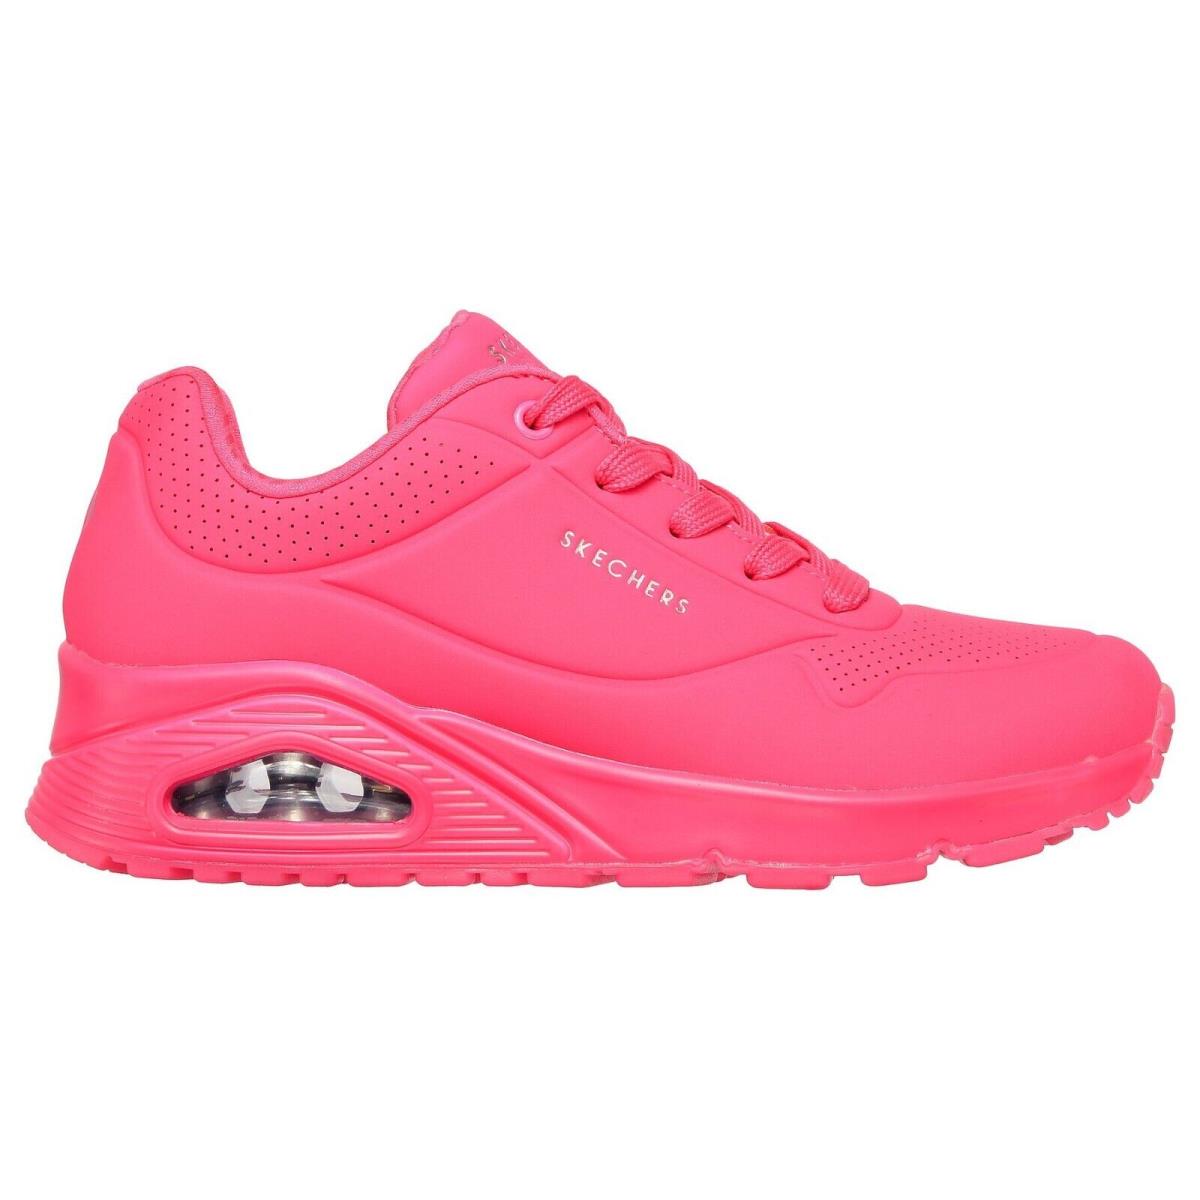 Skechers shoes Uno Night Shades - Hot Pink 10